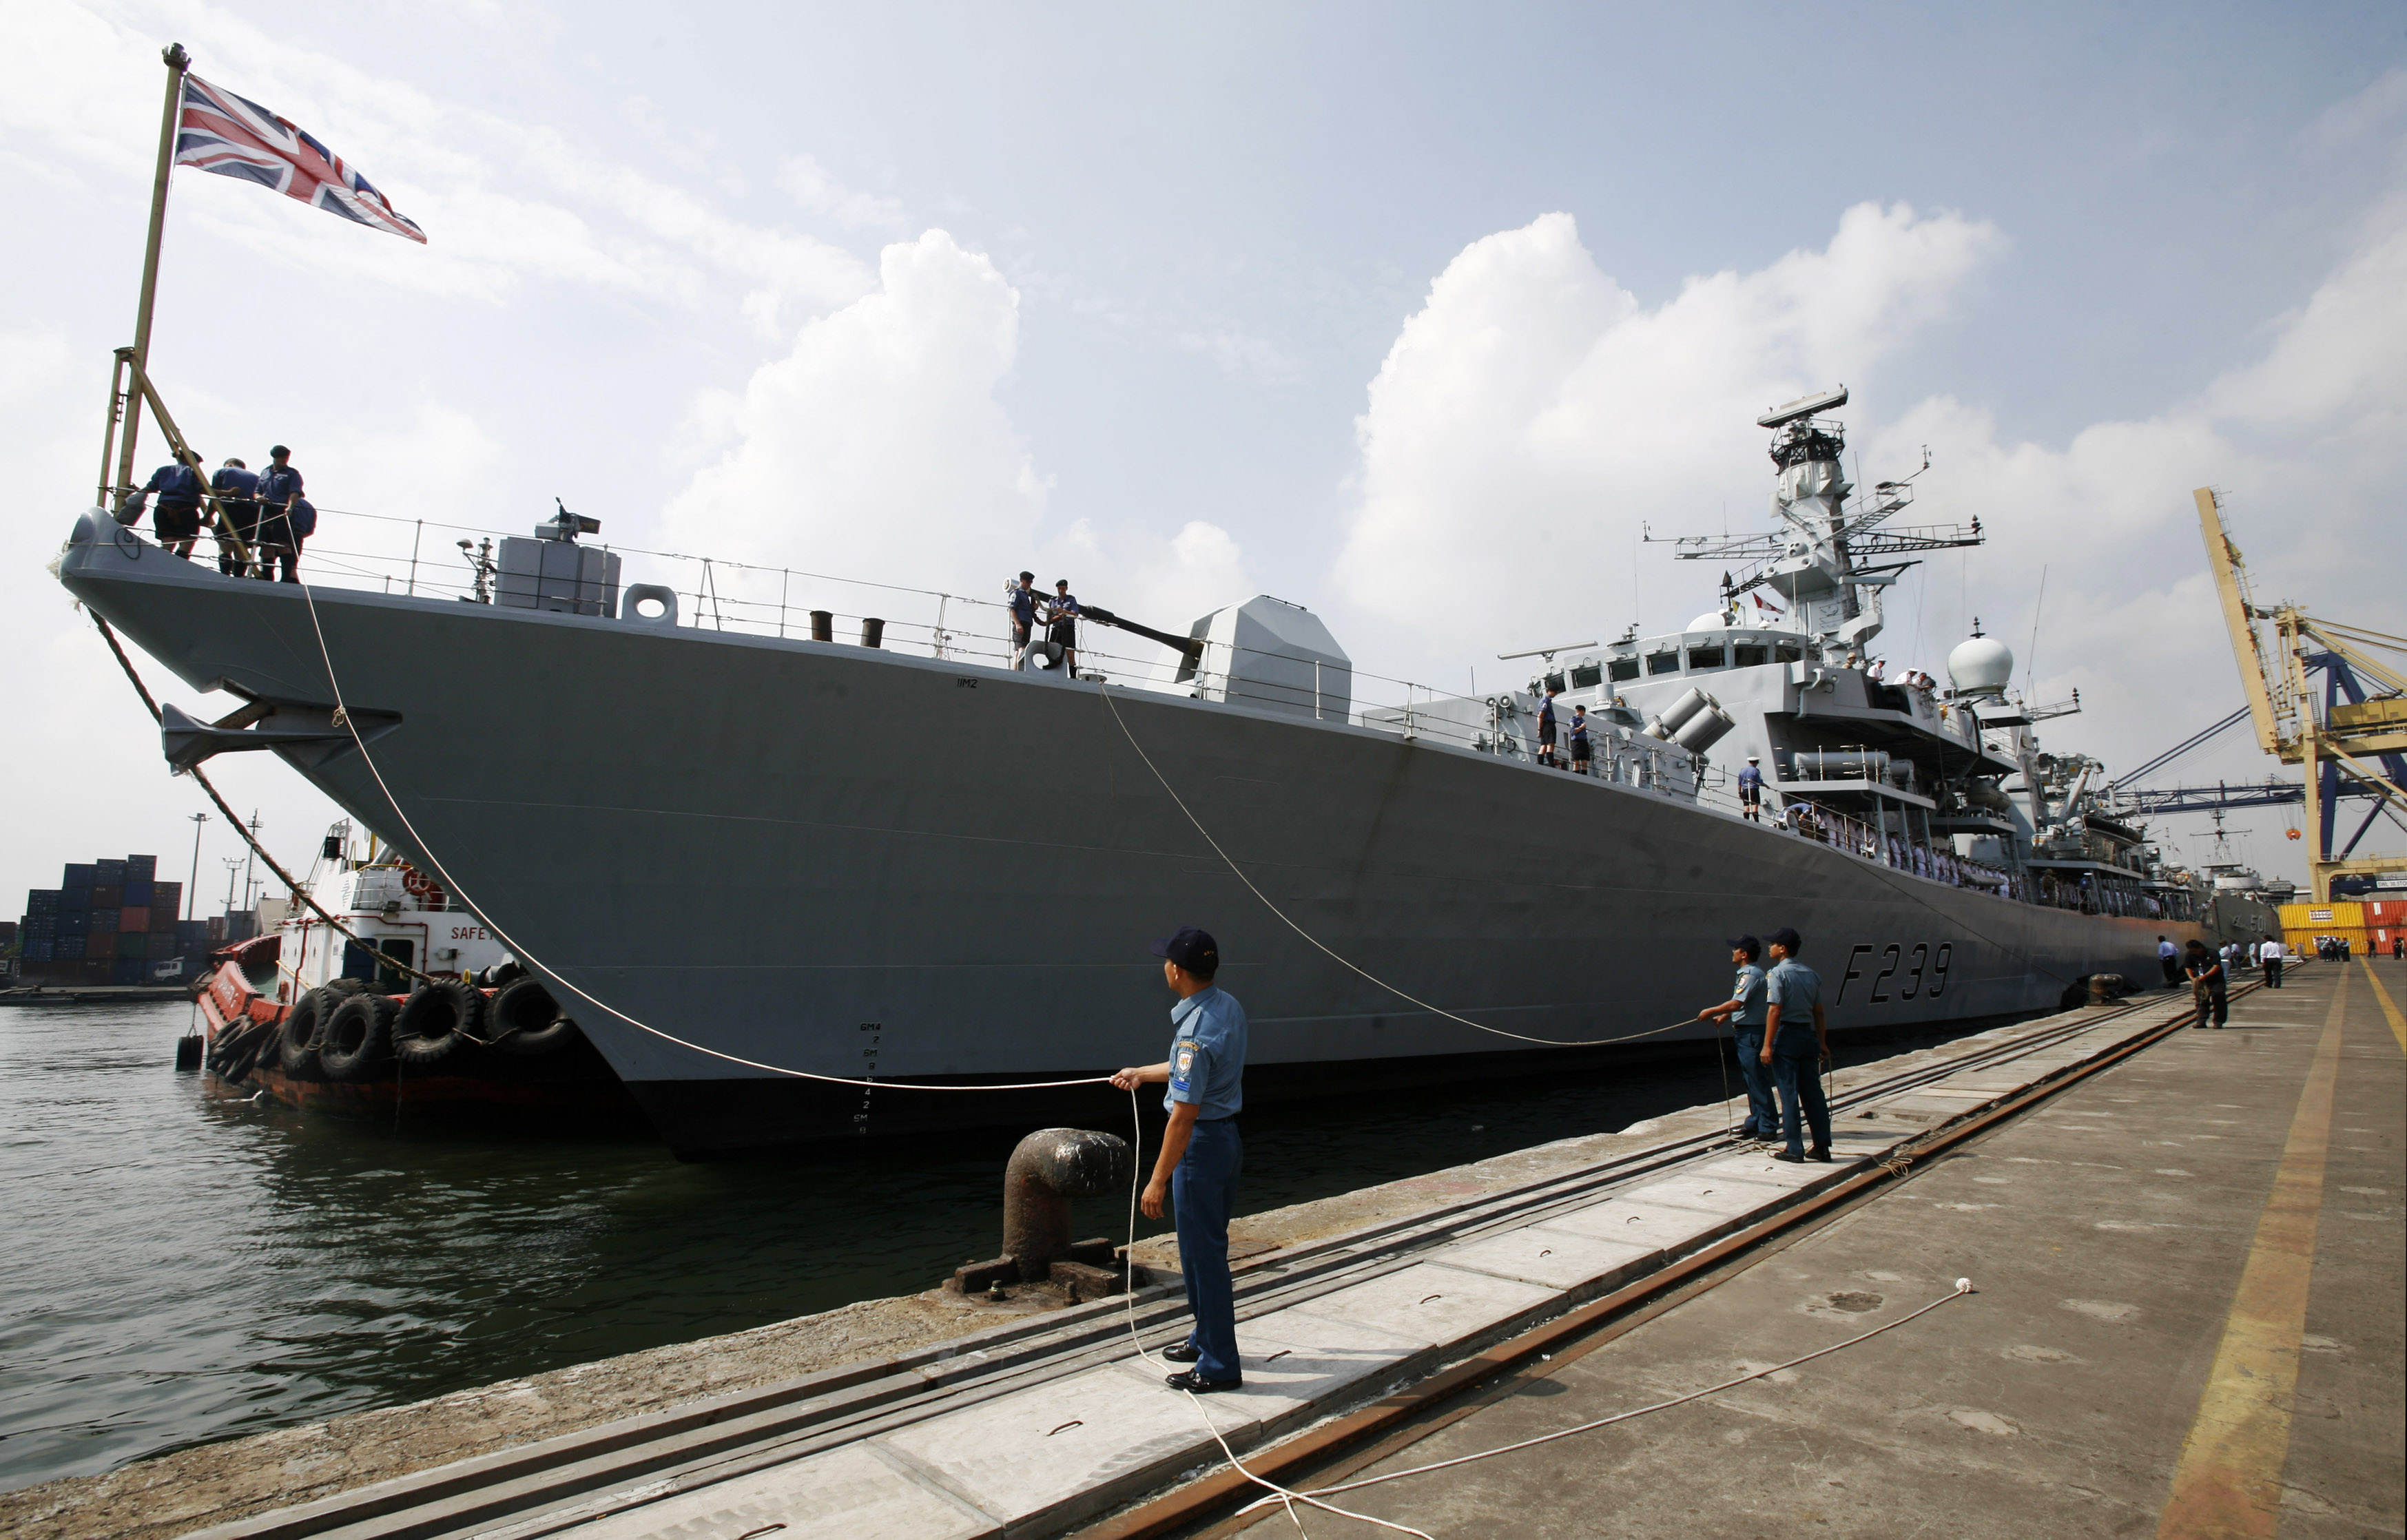 Officers of the Indonesian Navy greet the crew of the visiting British Royal Navy ship HMS Richmond docked in Jakarta